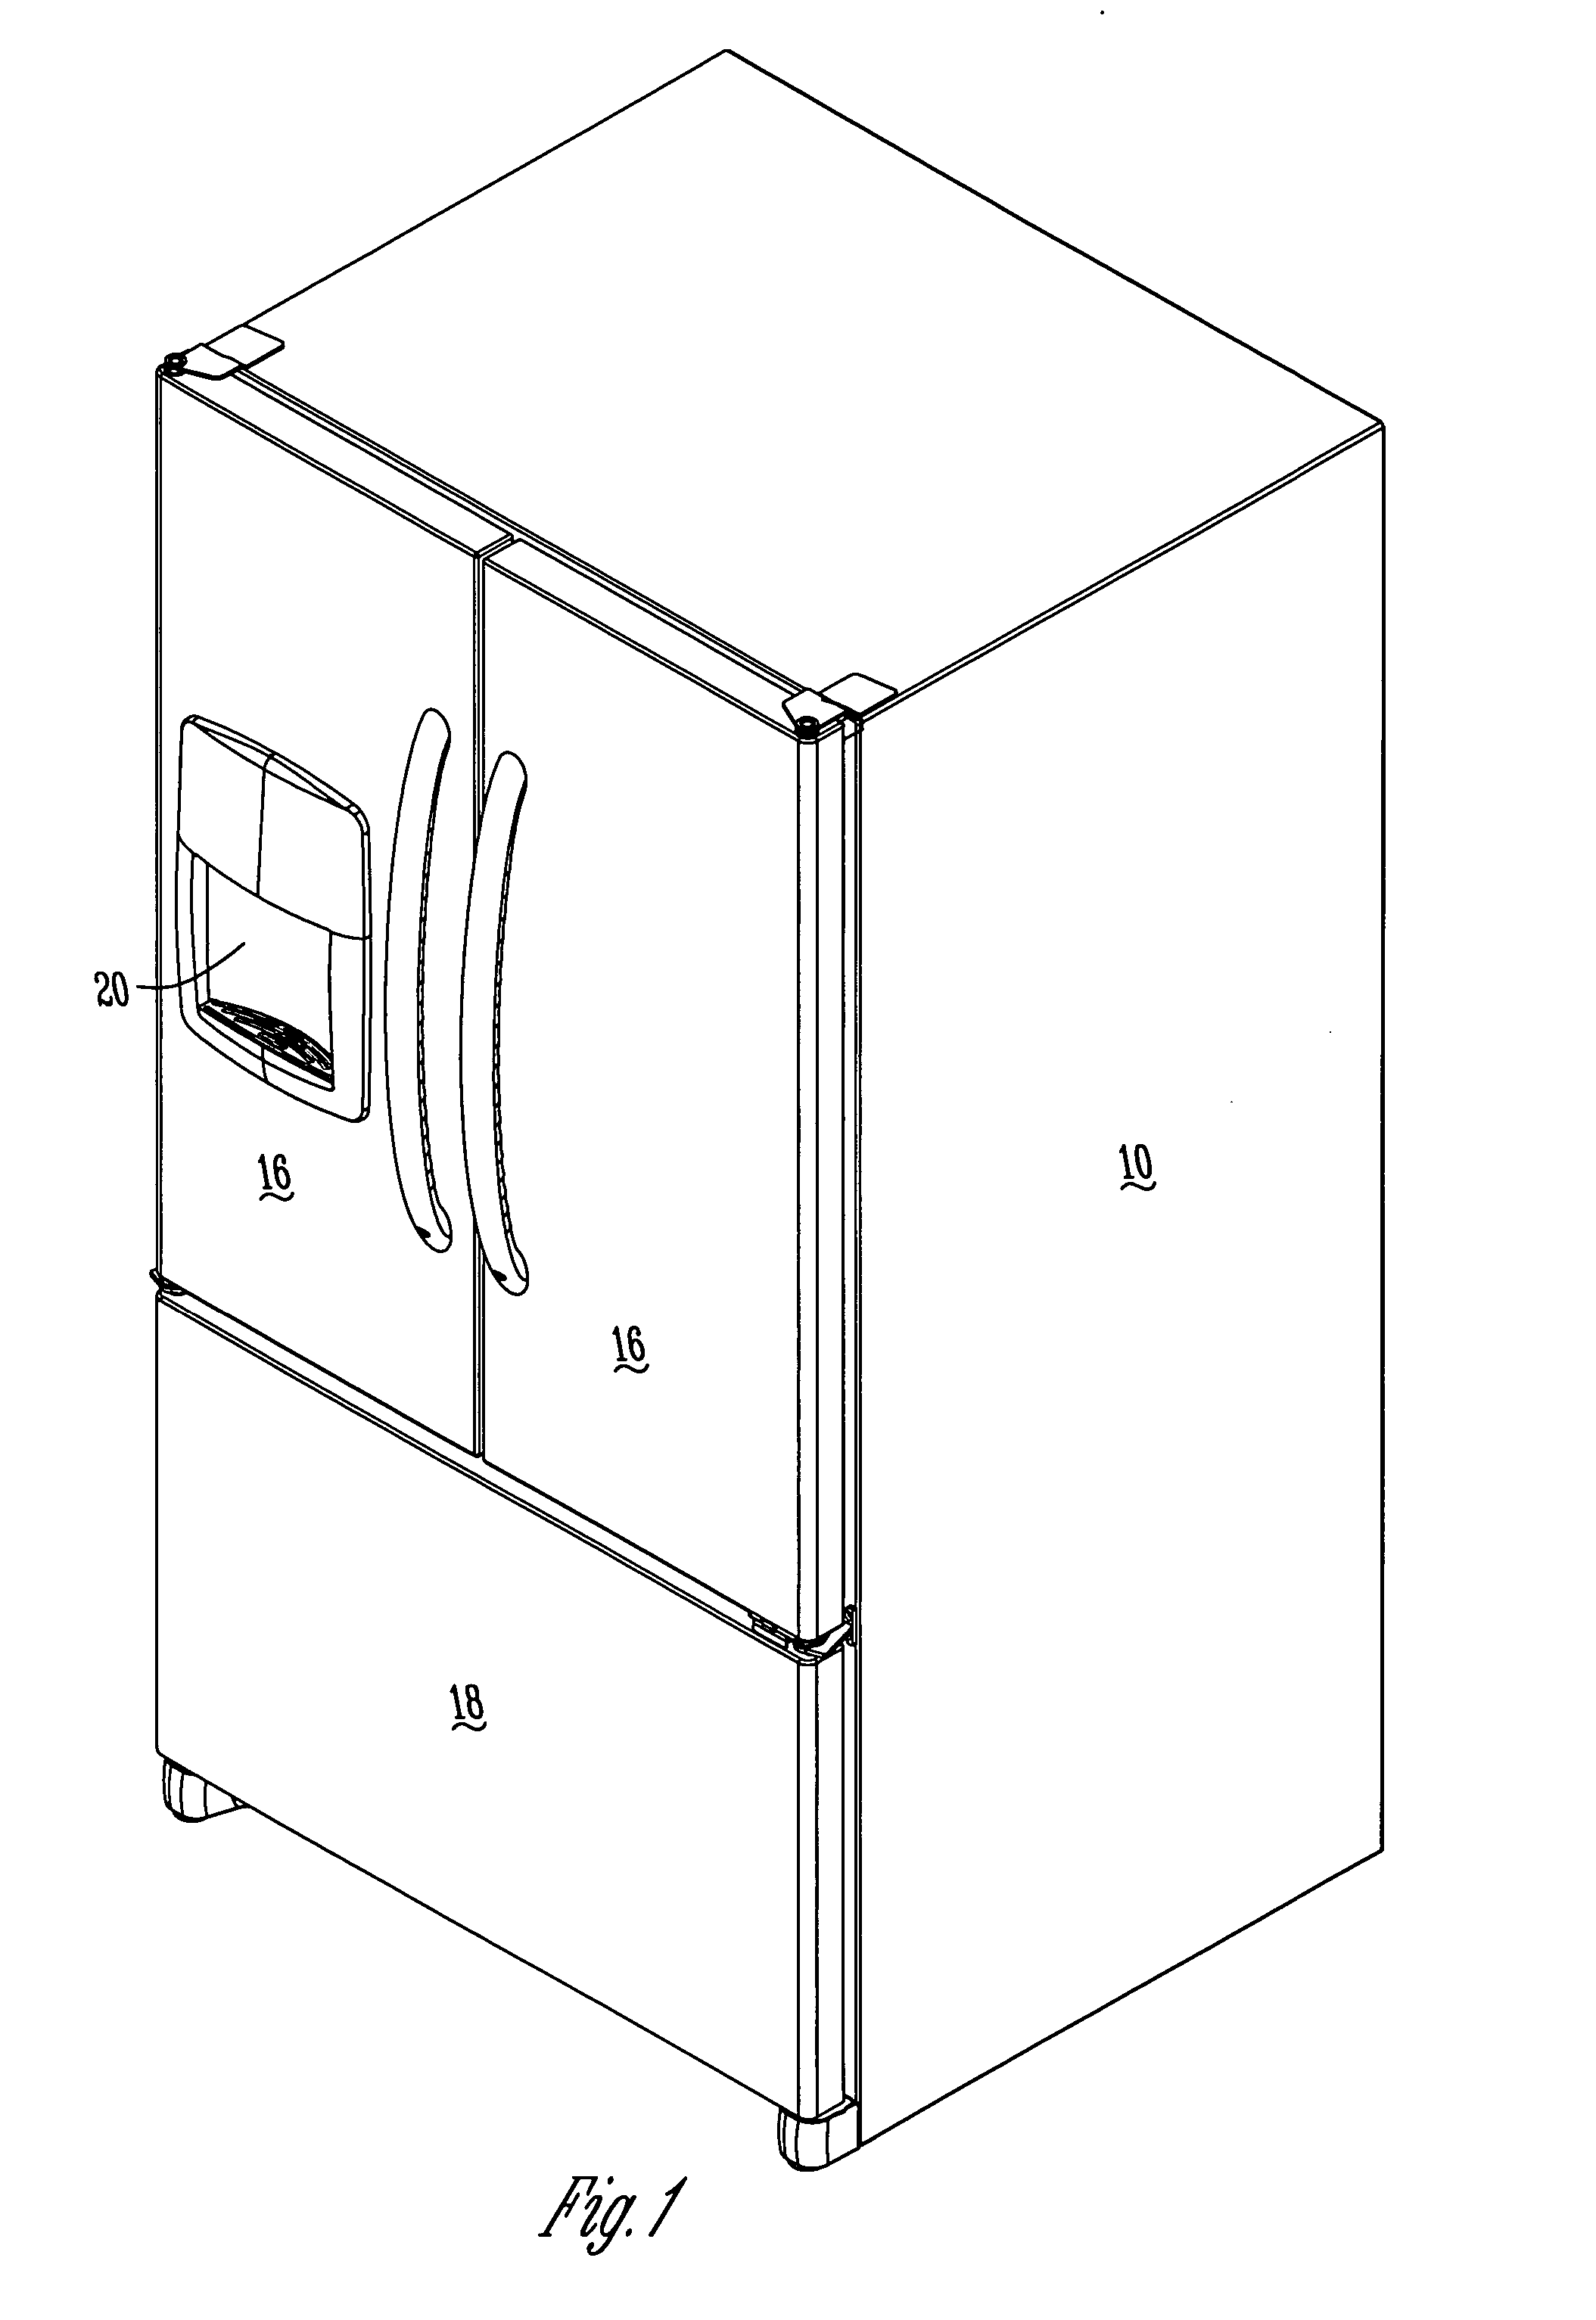 Electronic control system for insulated ice compartment for bottom mount refrigerator